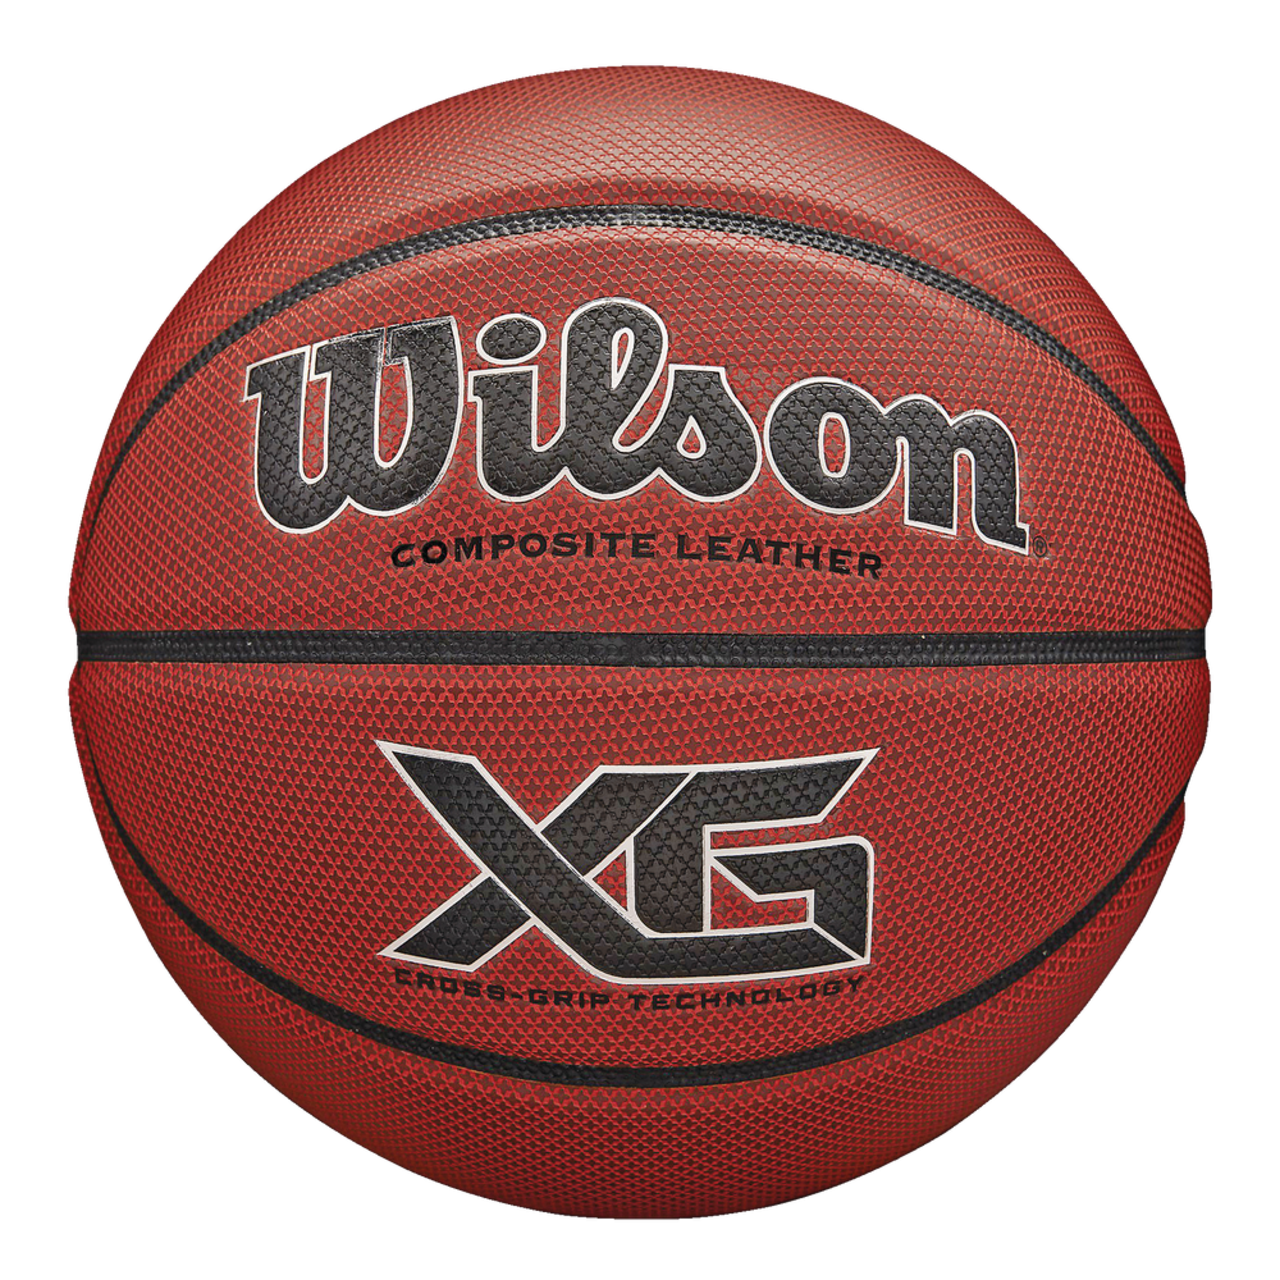 https://media-www.canadiantire.ca/product/playing/team-sports-and-golf/sports-equipment-accessories/1840222/wilson-crossgrip-xg-composite-basketball-3db0ab61-7ffc-4c5b-bb00-ad71a61d9366.png?imdensity=1&imwidth=1244&impolicy=mZoom